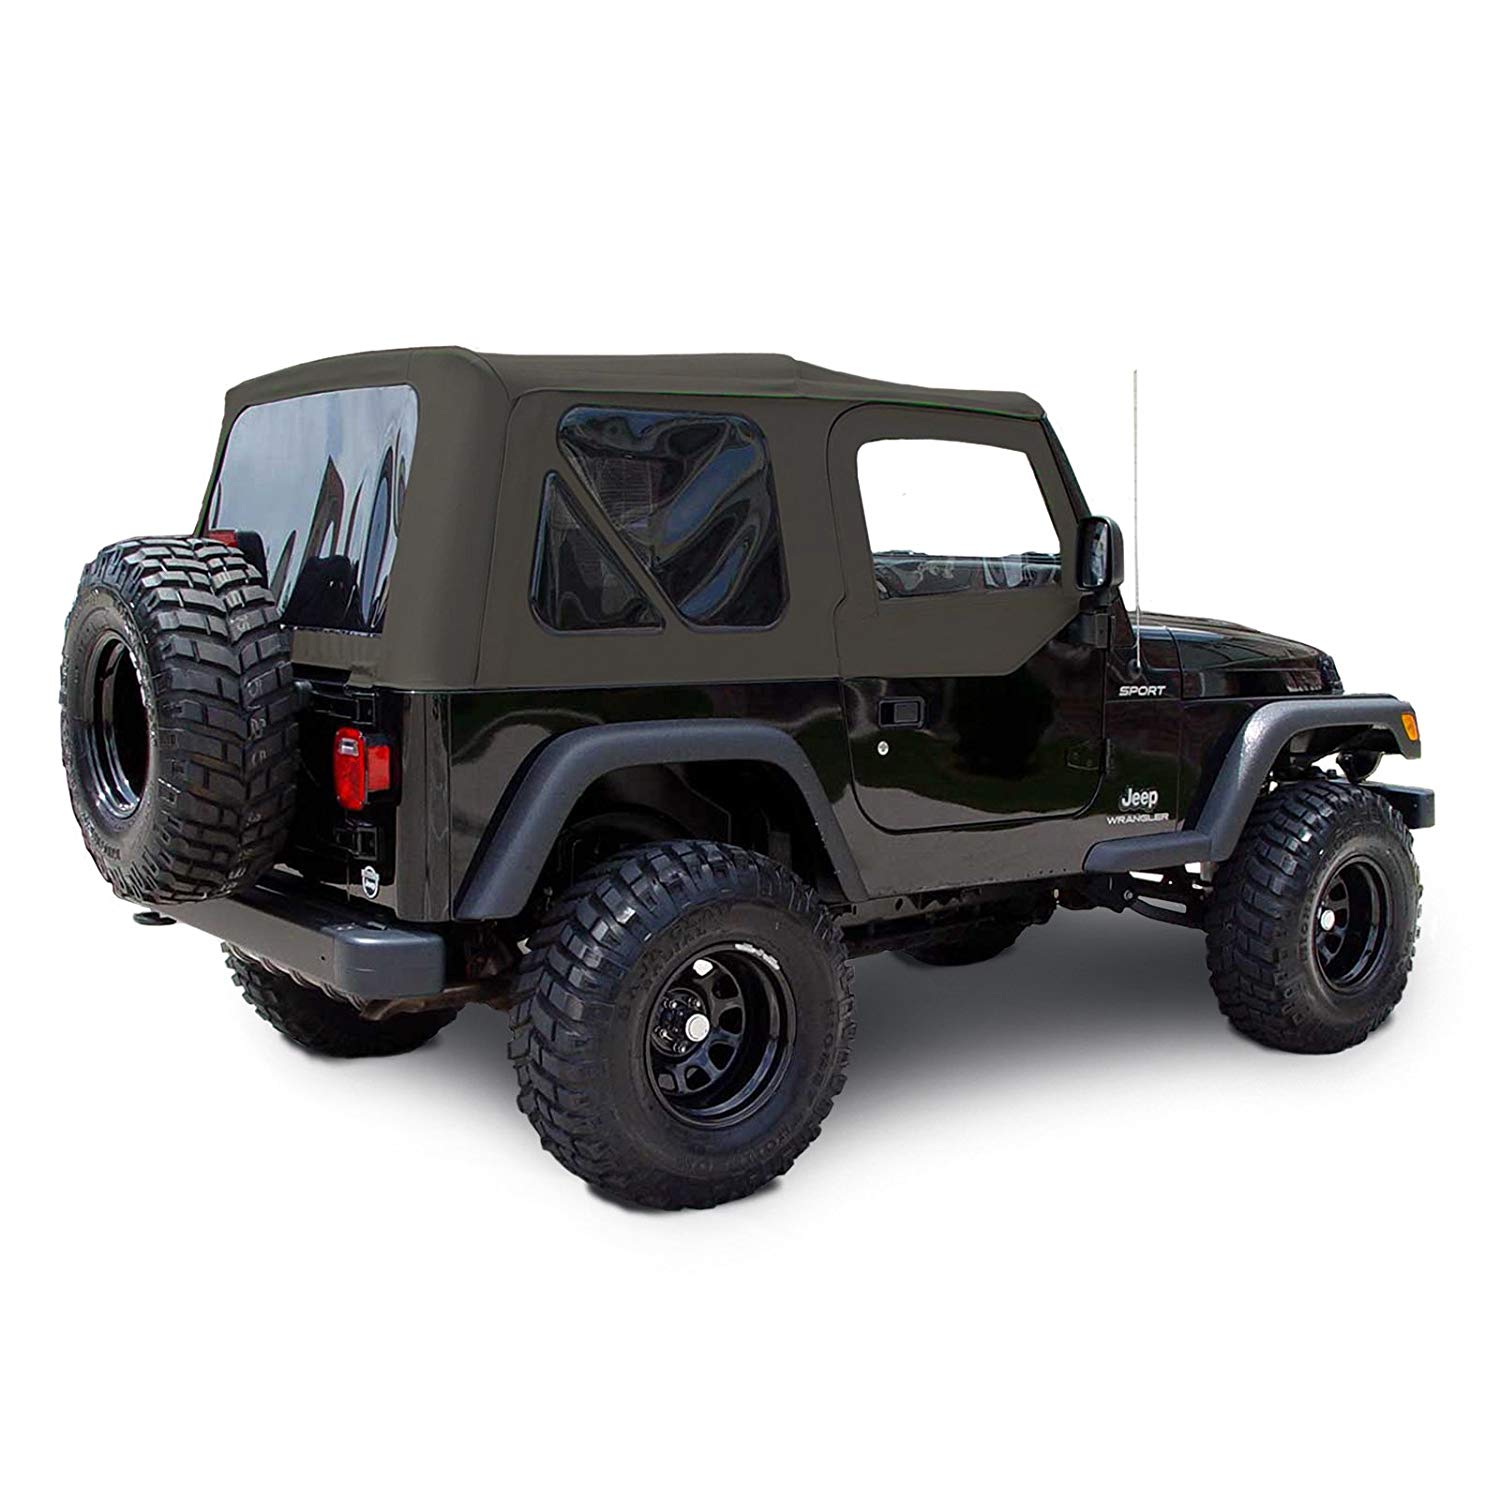 Sierra Offroad soft tops: Difference between 97-02 and 03-06 models? | Jeep  Wrangler TJ Forum